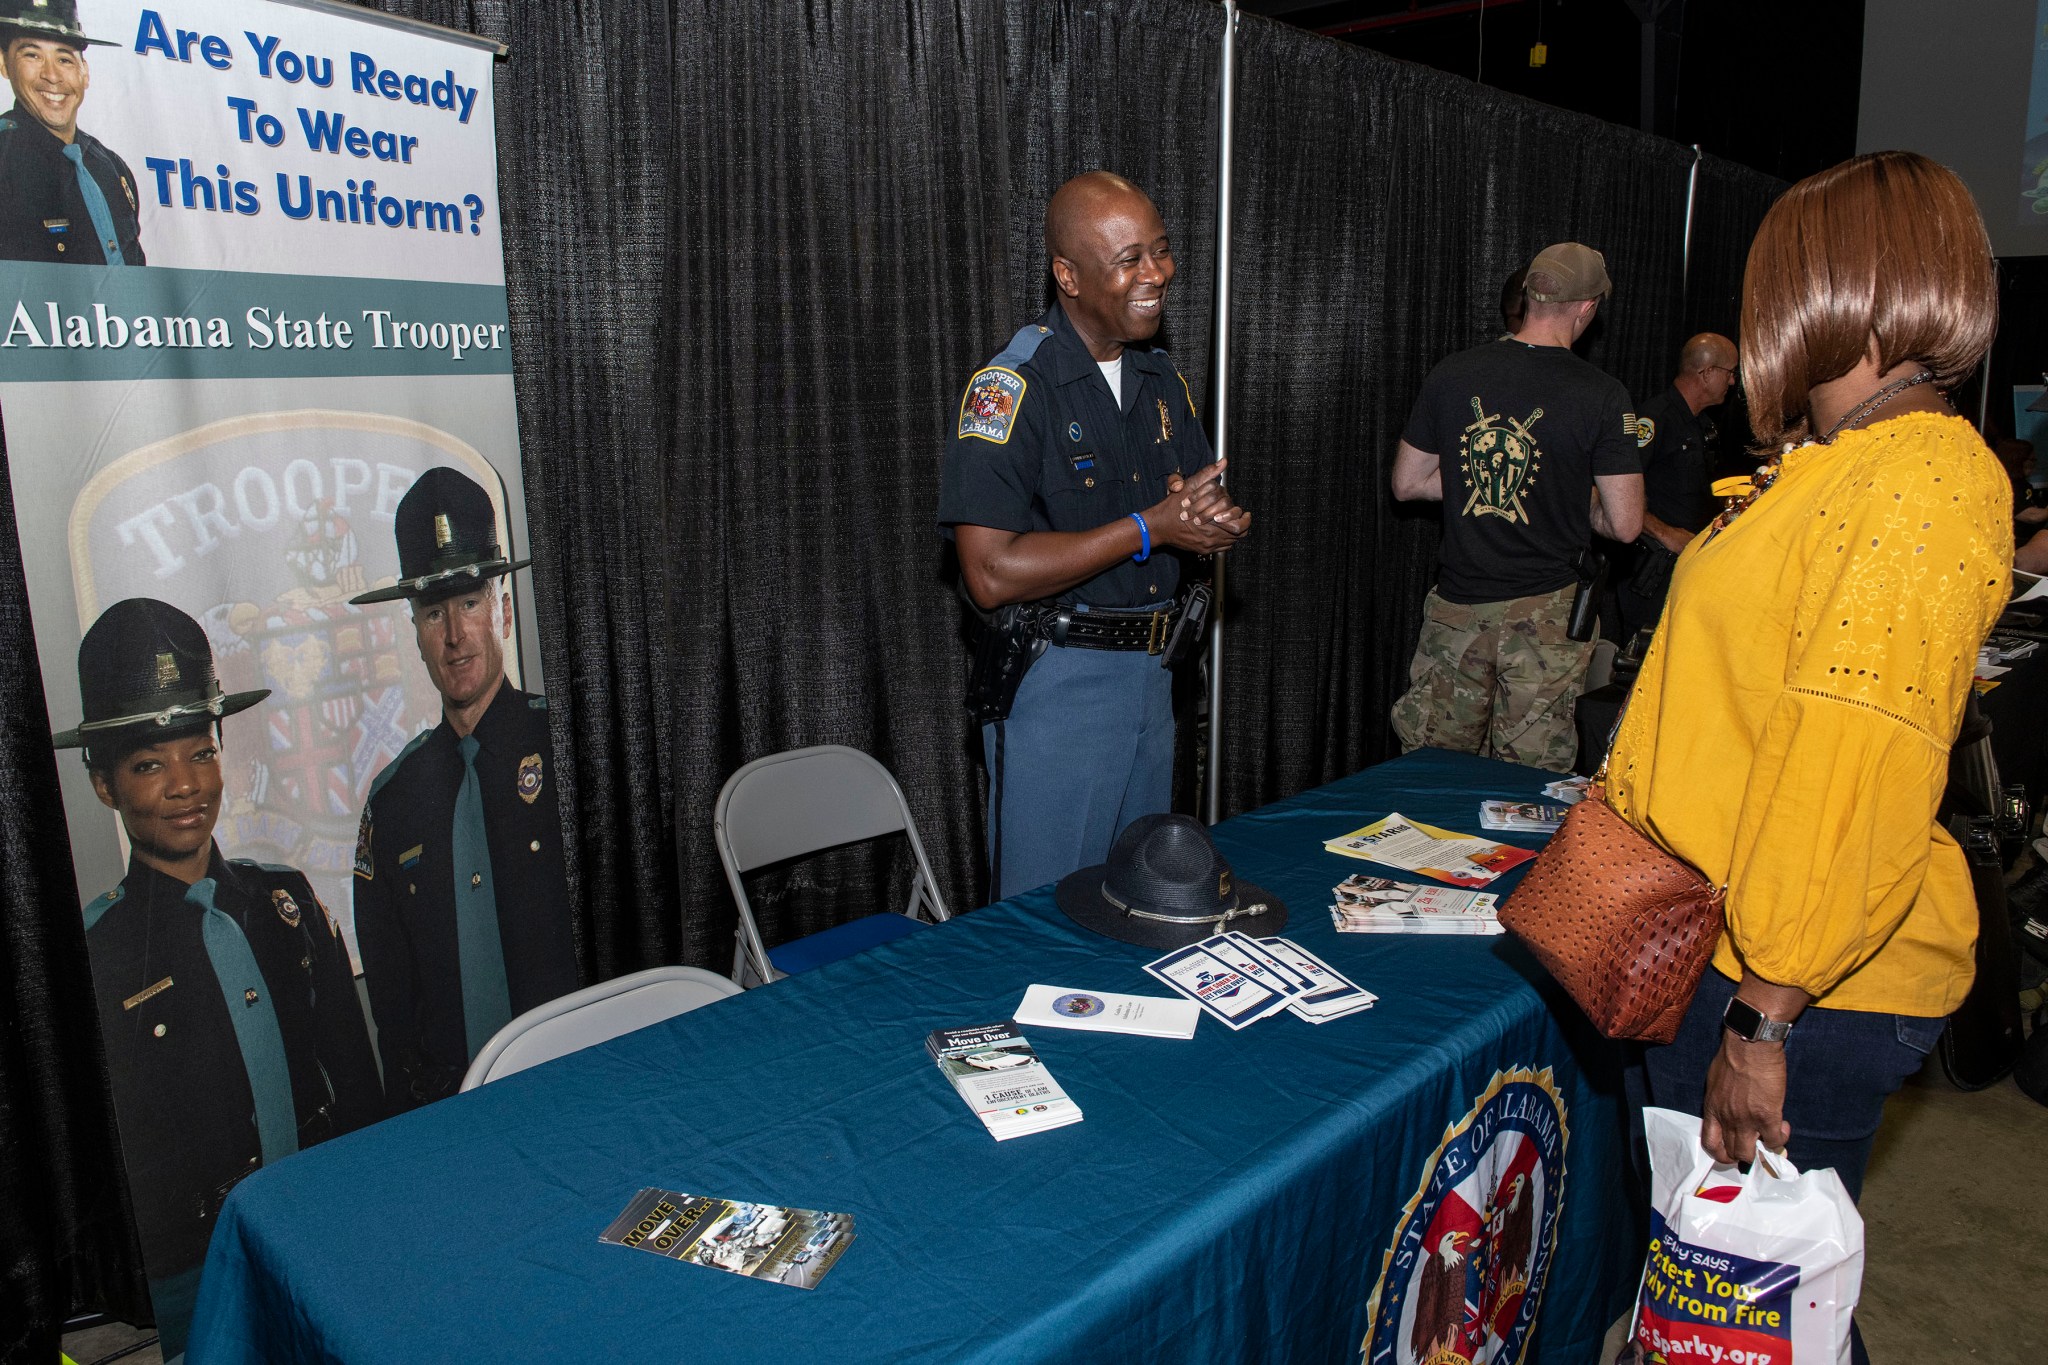 The Alabama State Troopers were among organizations taking part during Safety Day on Oct. 2 at the Marshall Space Flight Center.